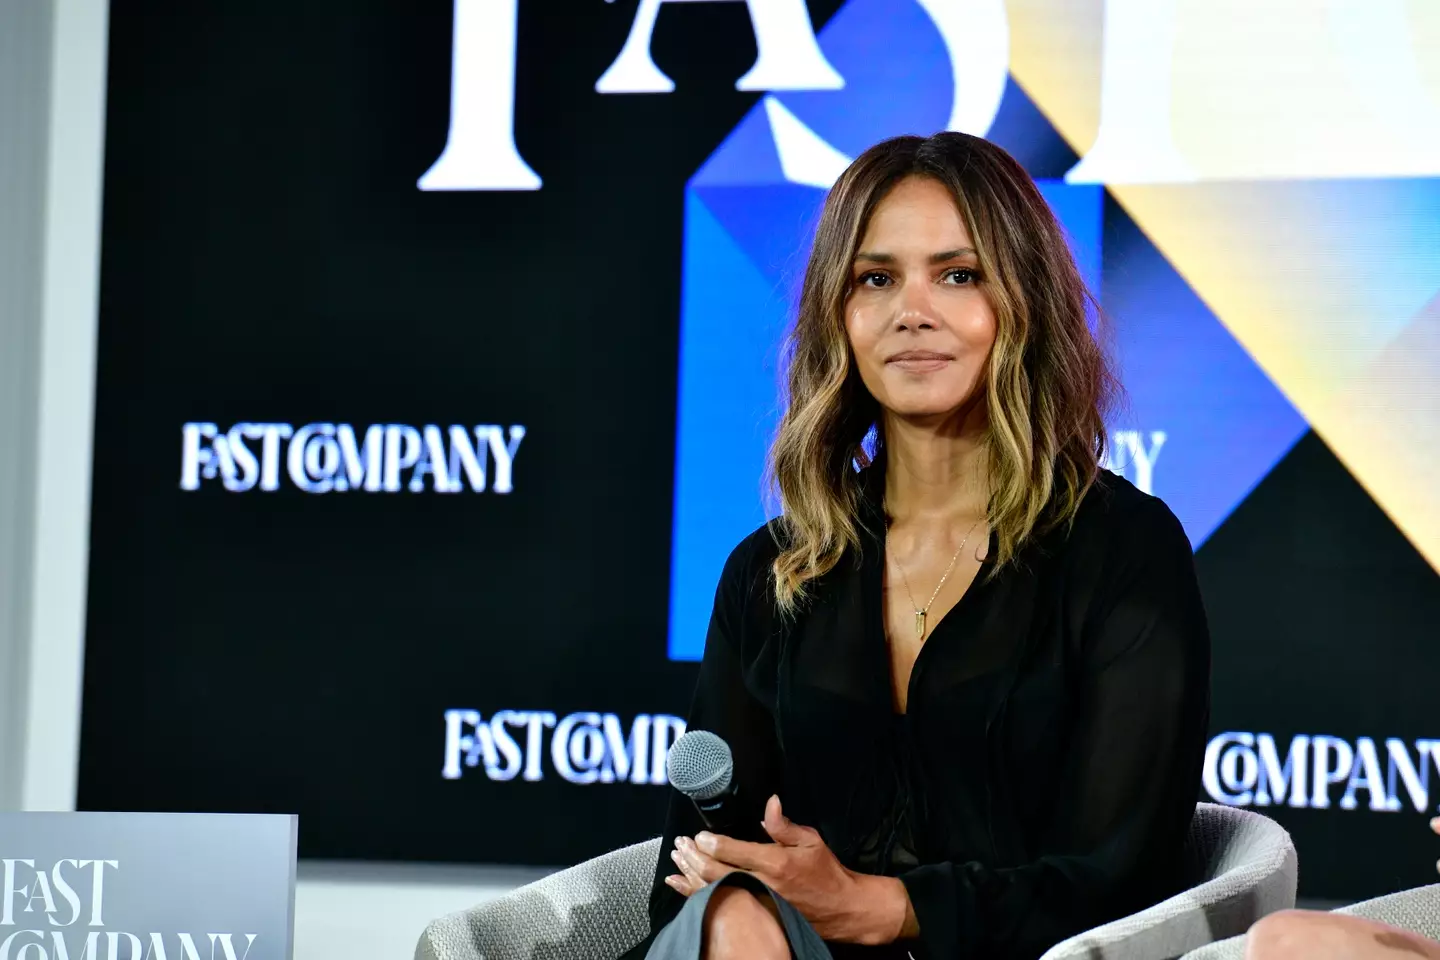 Halle Berry's recent post left her followers swooning.